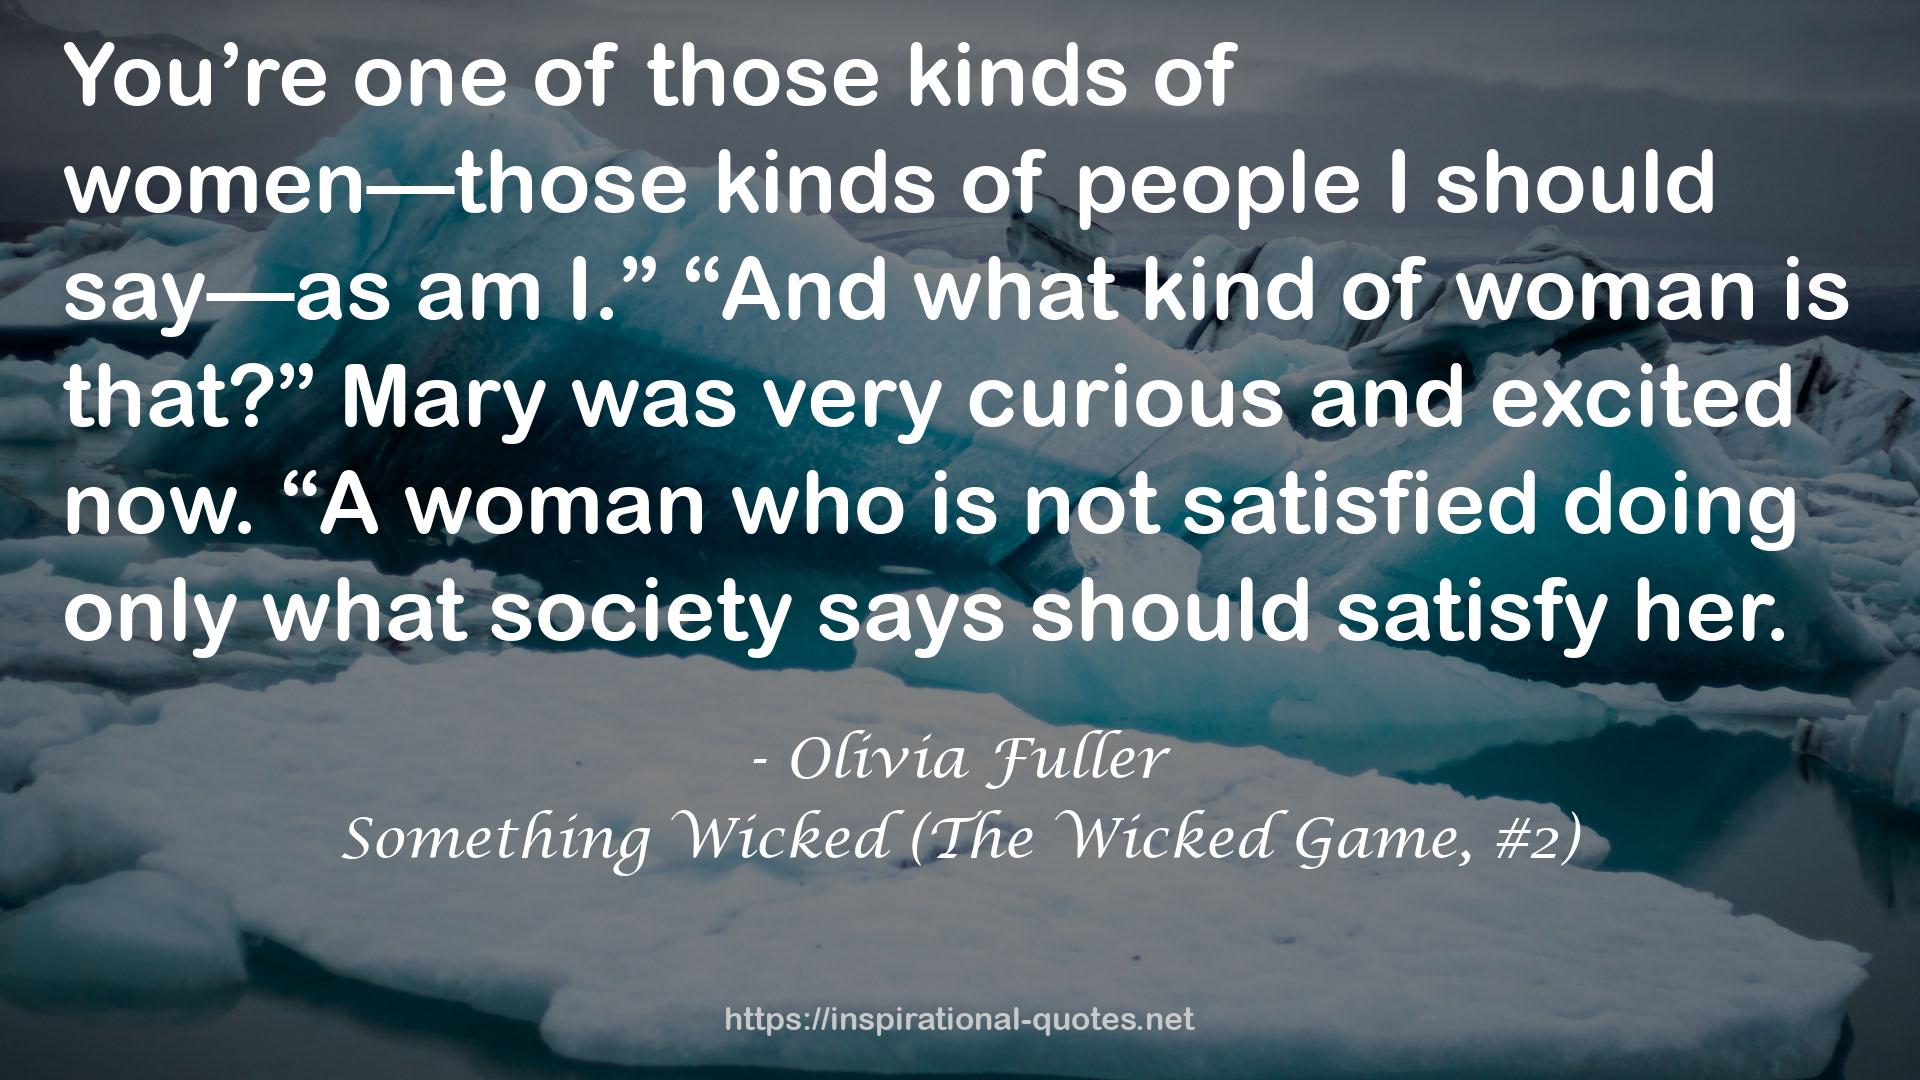 Something Wicked (The Wicked Game, #2) QUOTES